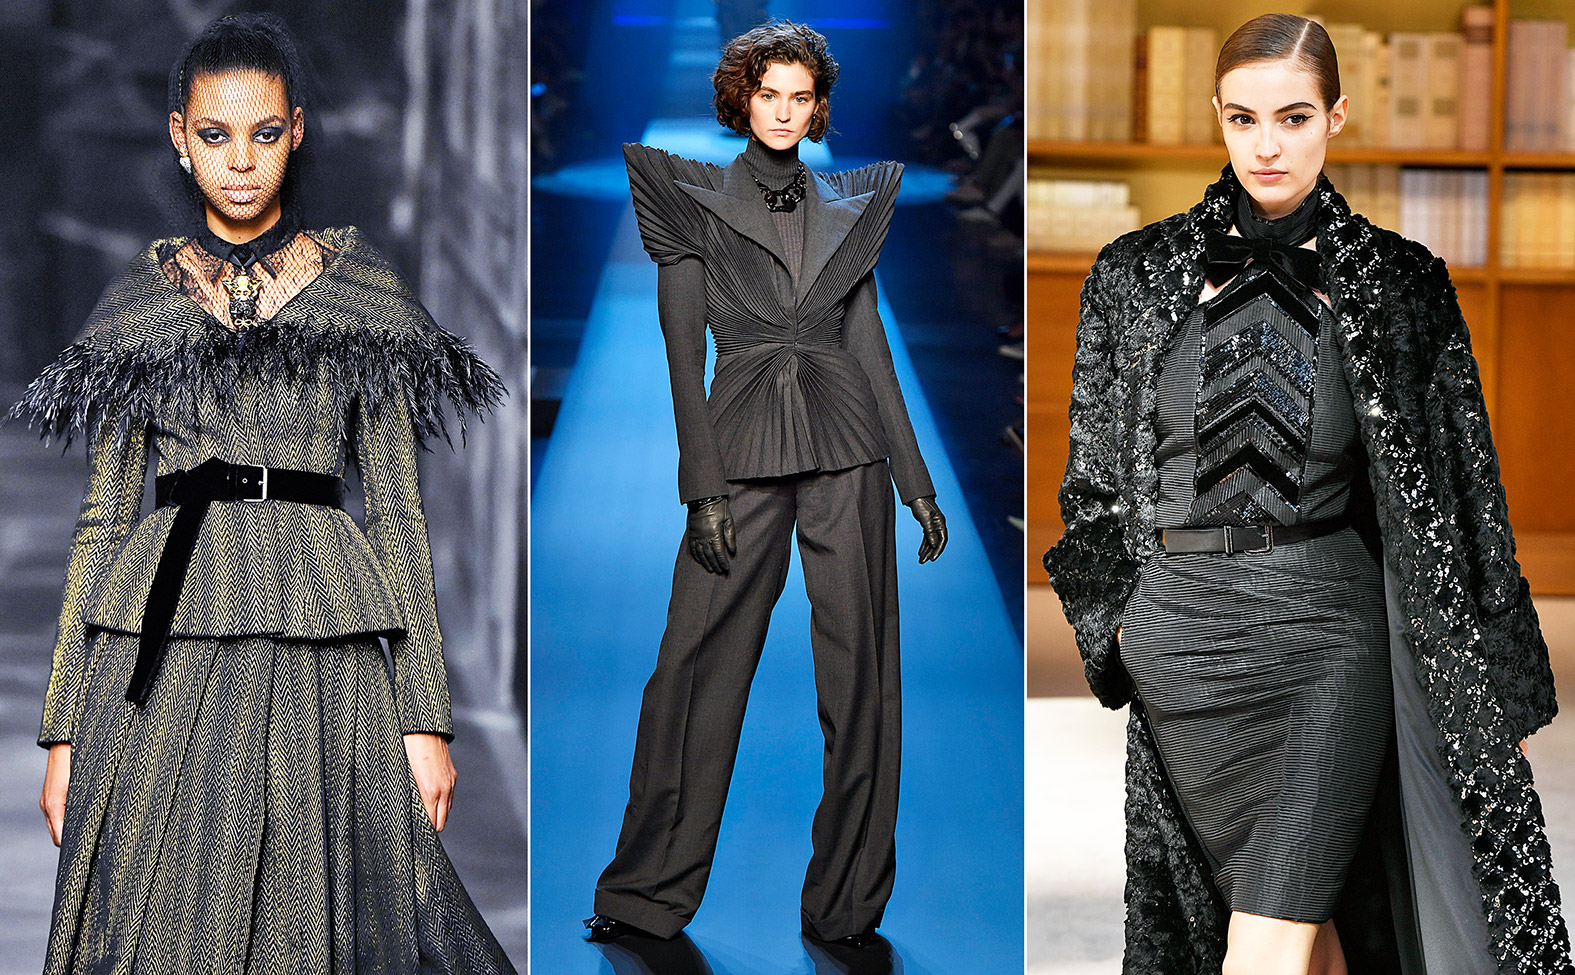 Haute Couture - The Fine Art of Tailoring